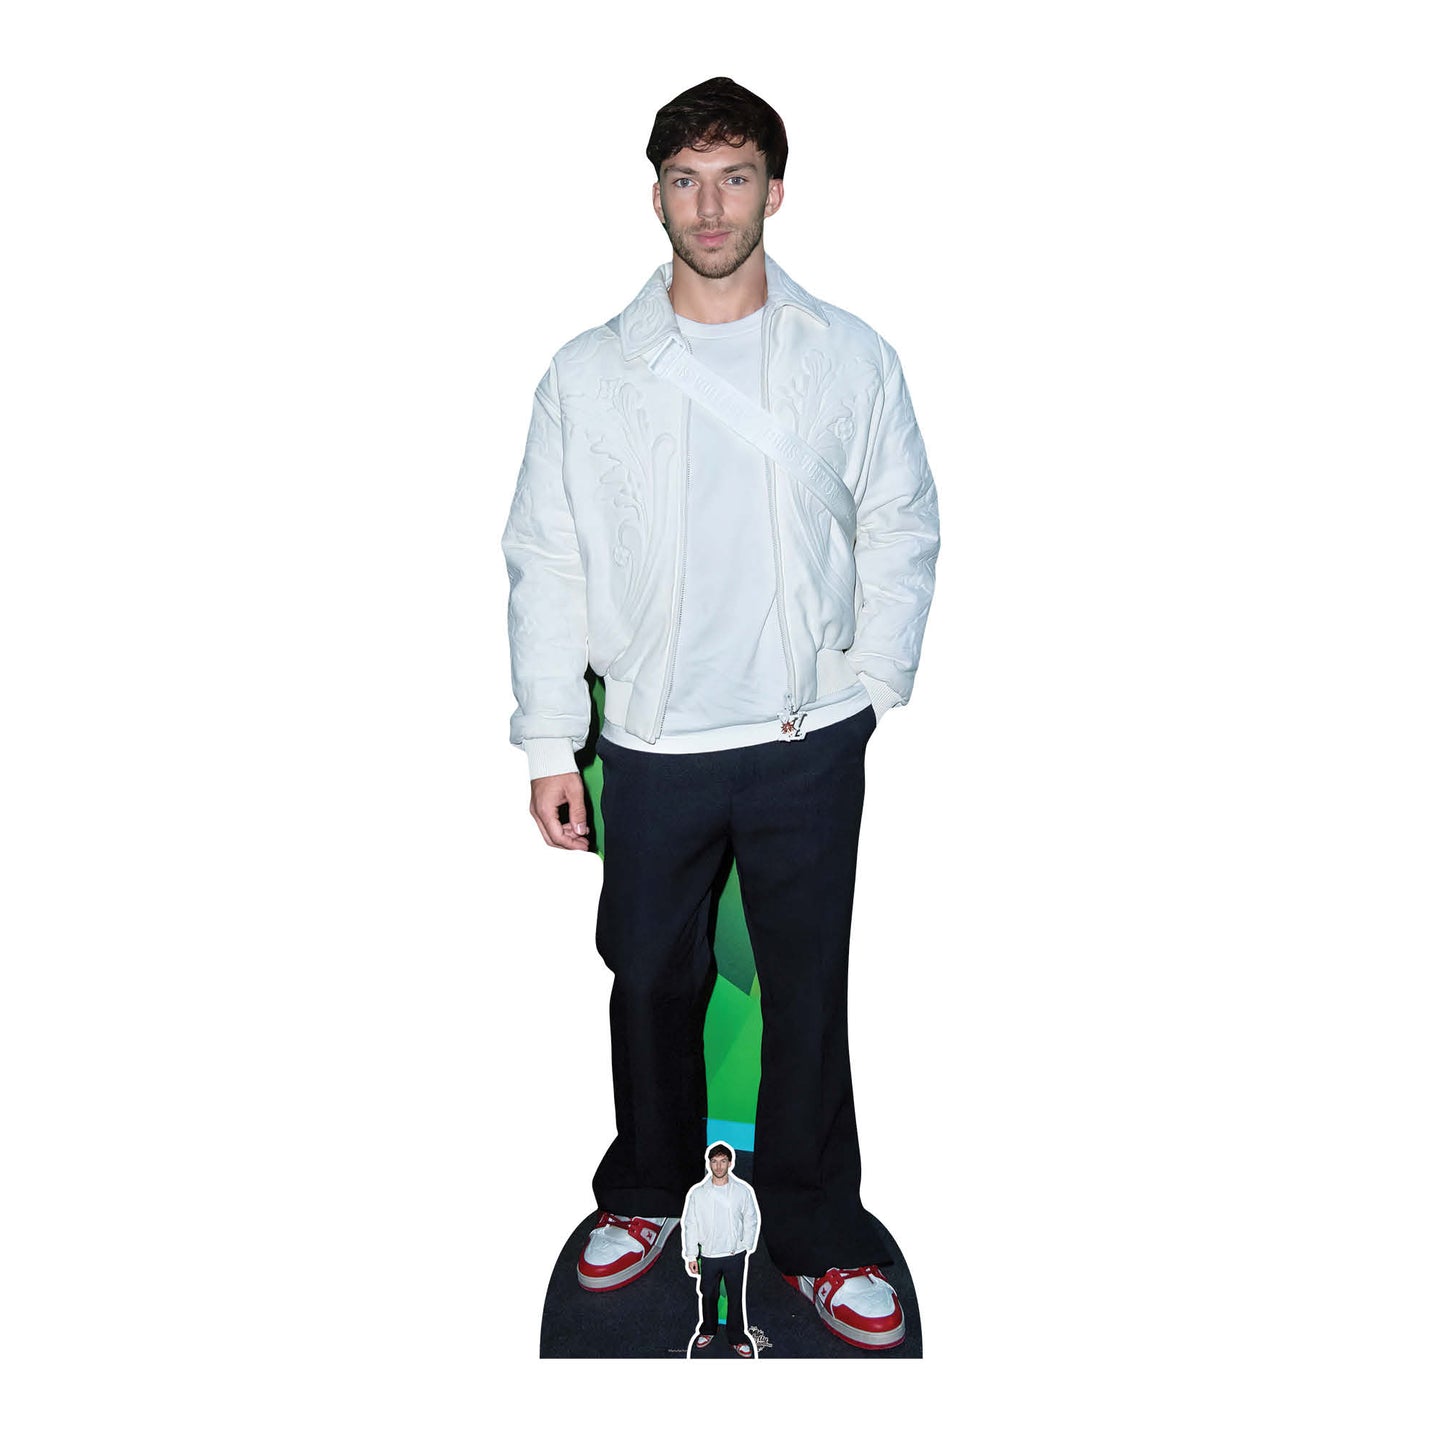 CS1073 Pierre Gasly Height 178cm Lifesize Cardboard Cut Out With Mini